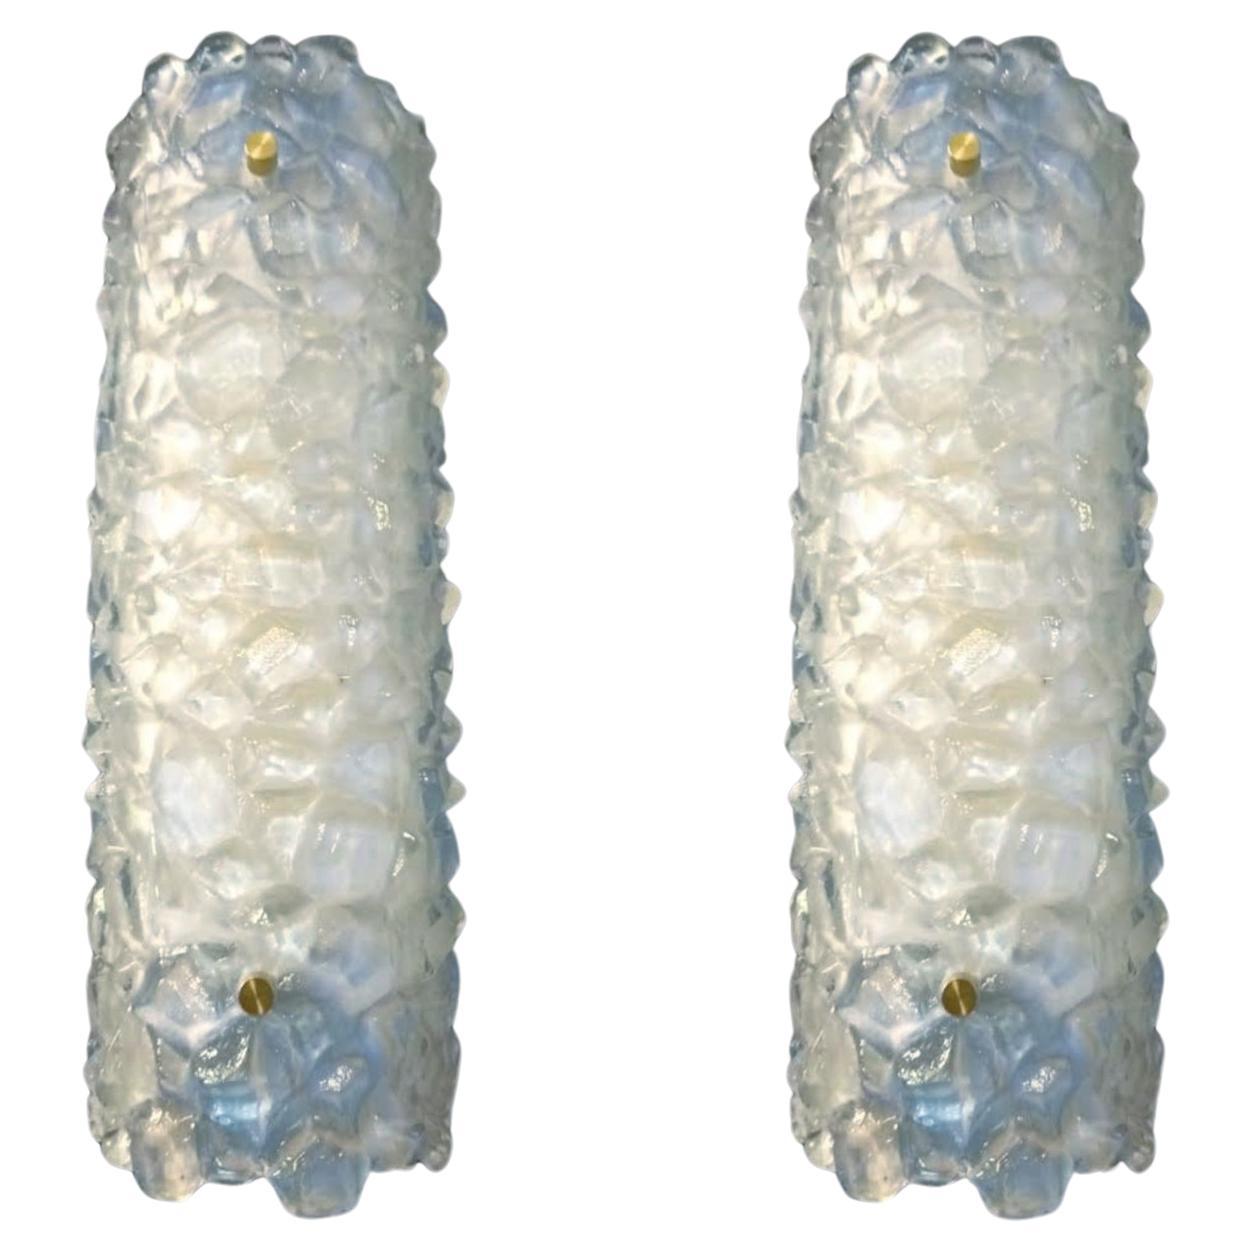 Pair of Modern Opaline Murano Sconces by Fabio Ltd, 3 Pairs Available